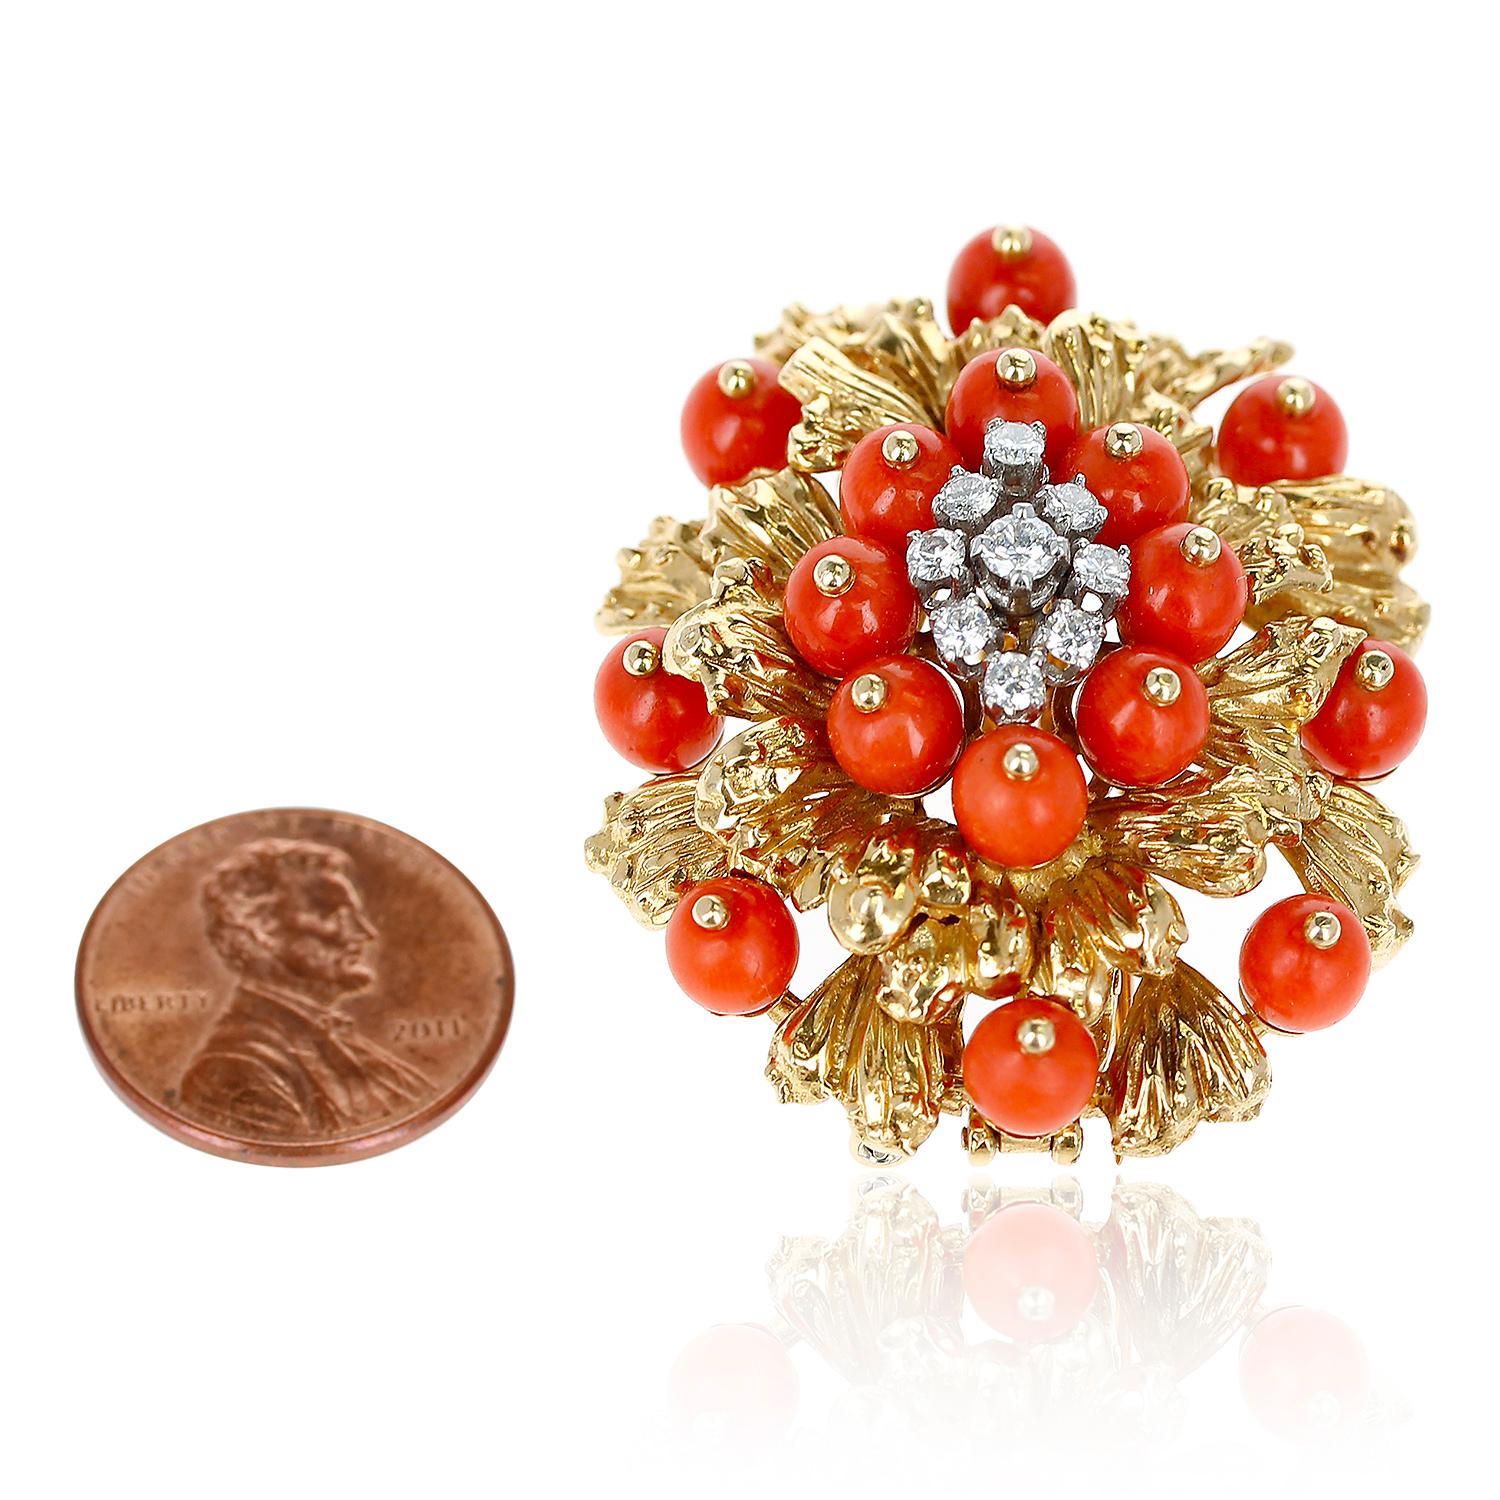 Bead Cartier Coral, Diamonds, and 18 Karat Gold Brooch and Pendant For Sale